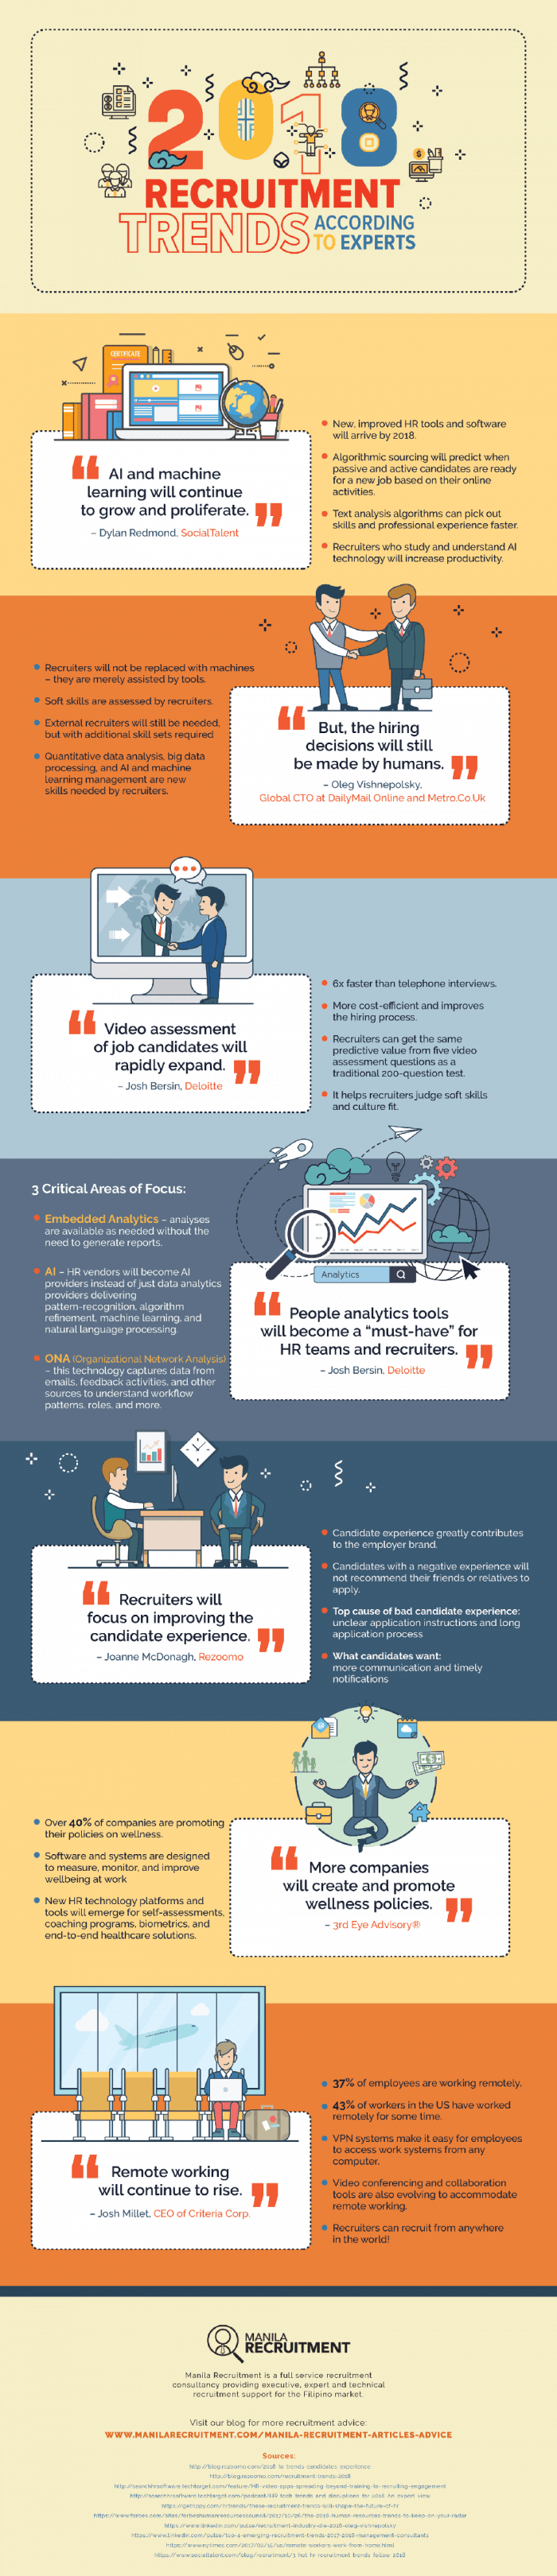 infographic describes how to get hired, recruitment trends, how to land a great job